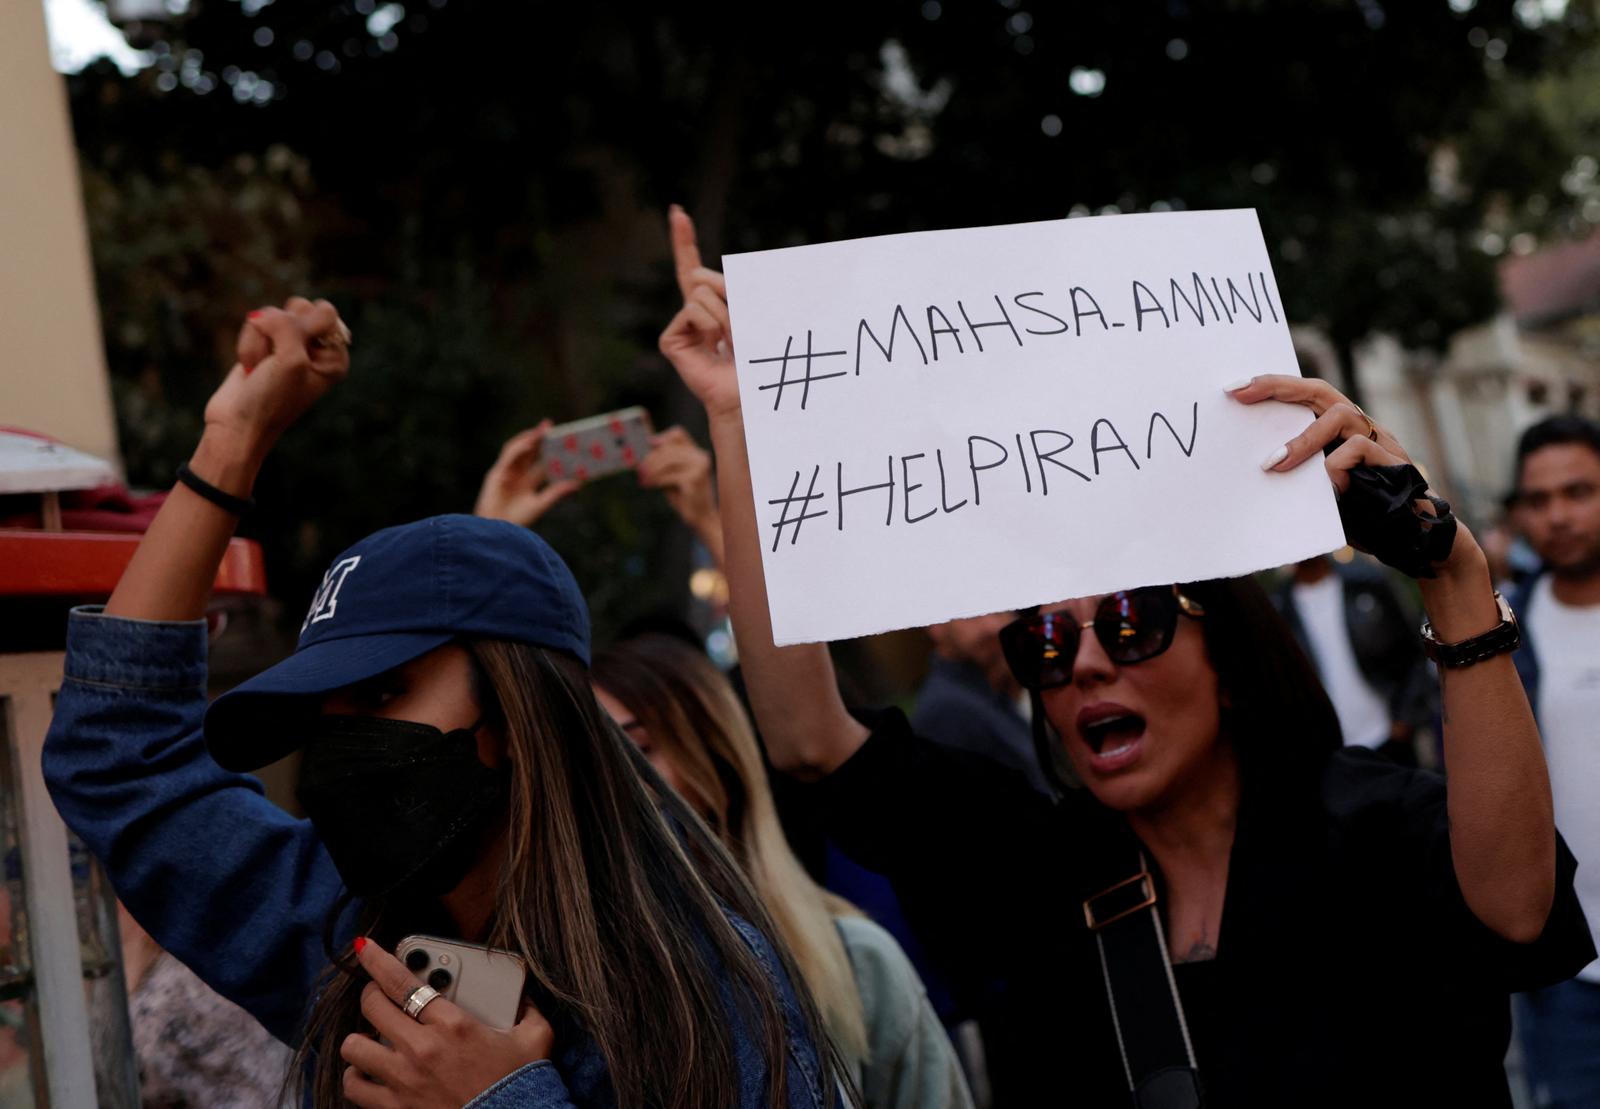 A demonstrator shouts slogans while holding a sign during a protest in solidarity with women in Iran following the death of a young Iranian woman, Mahsa Amini, in central Istanbul, Turkey September 20, 2022. REUTERS/Murad Sezer Photo: MURAD SEZER/REUTERS